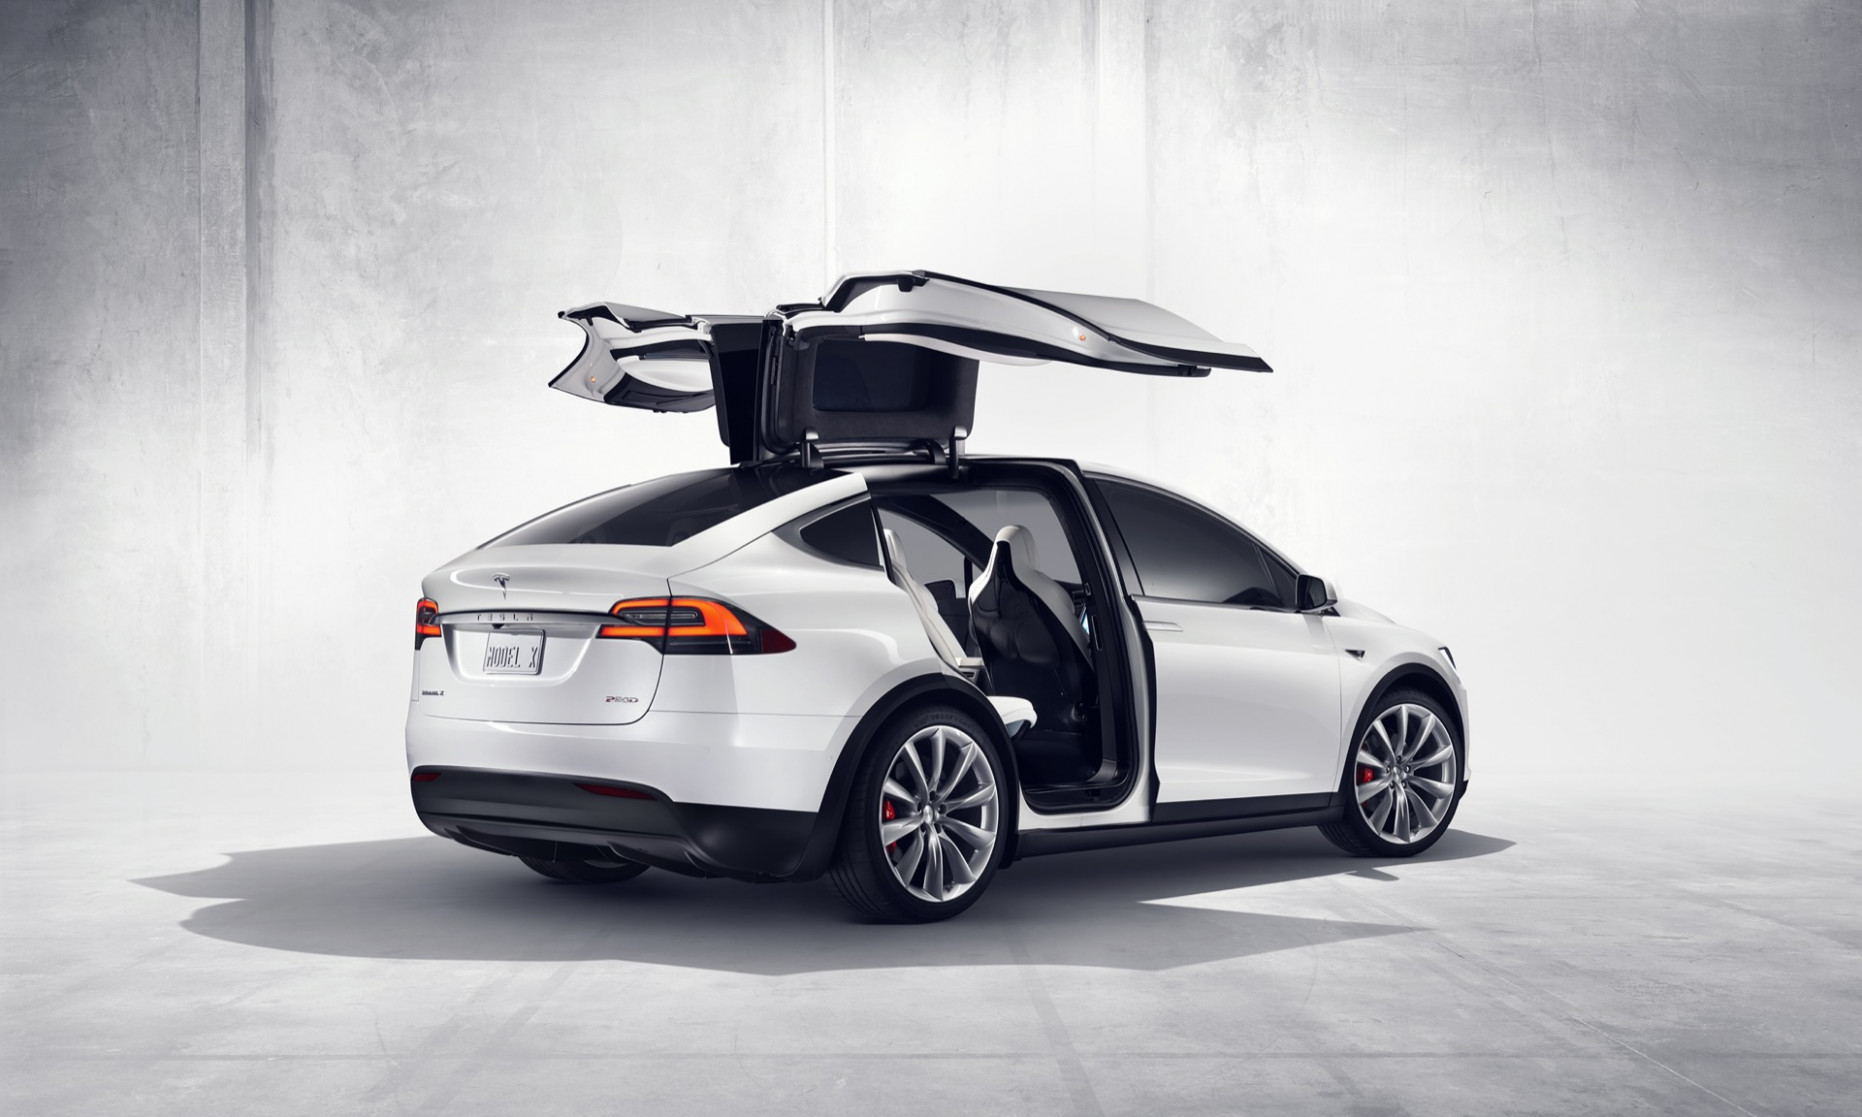 4 Tesla Model X Review, Ratings, Specs, Prices, And Photos Tesla Model X Price